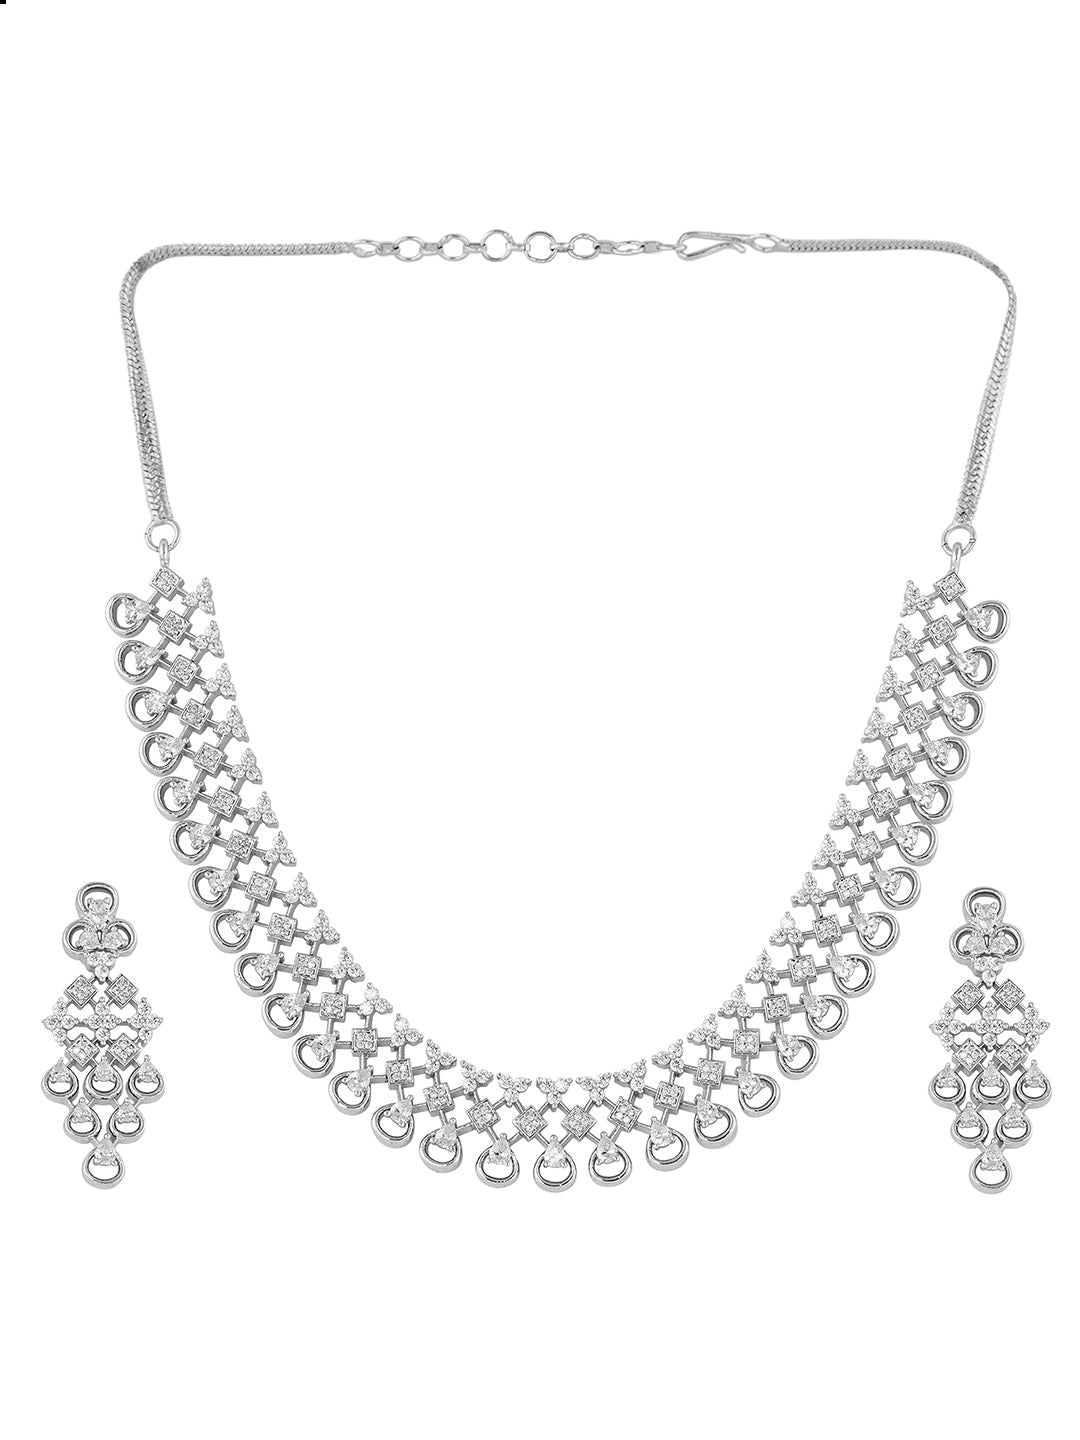 White gold necklaces | Stuff for Sale - Gumtree